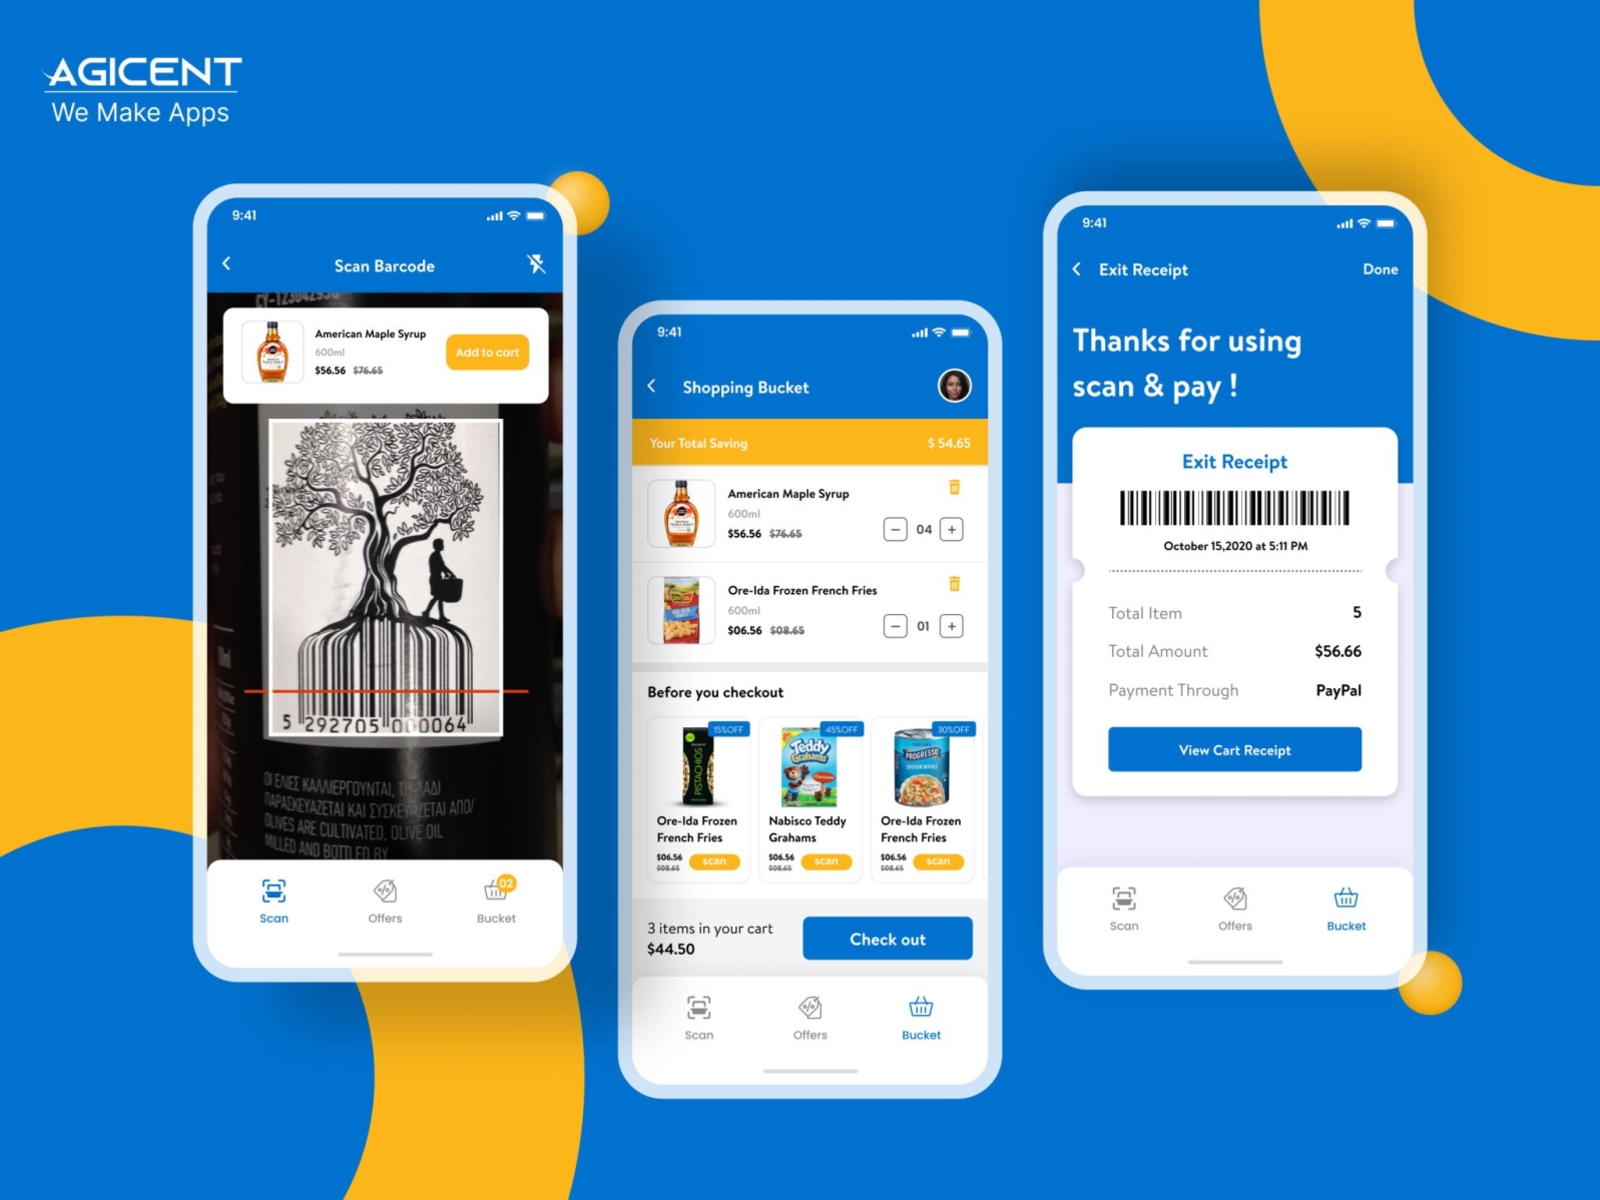 Supermarket Checkout App - Concept UI agicent amazon go android app app design automated checkout bar code business checkout create an app design ios app offers products scan and pay self checkout stores supermarket ui ux wallmart